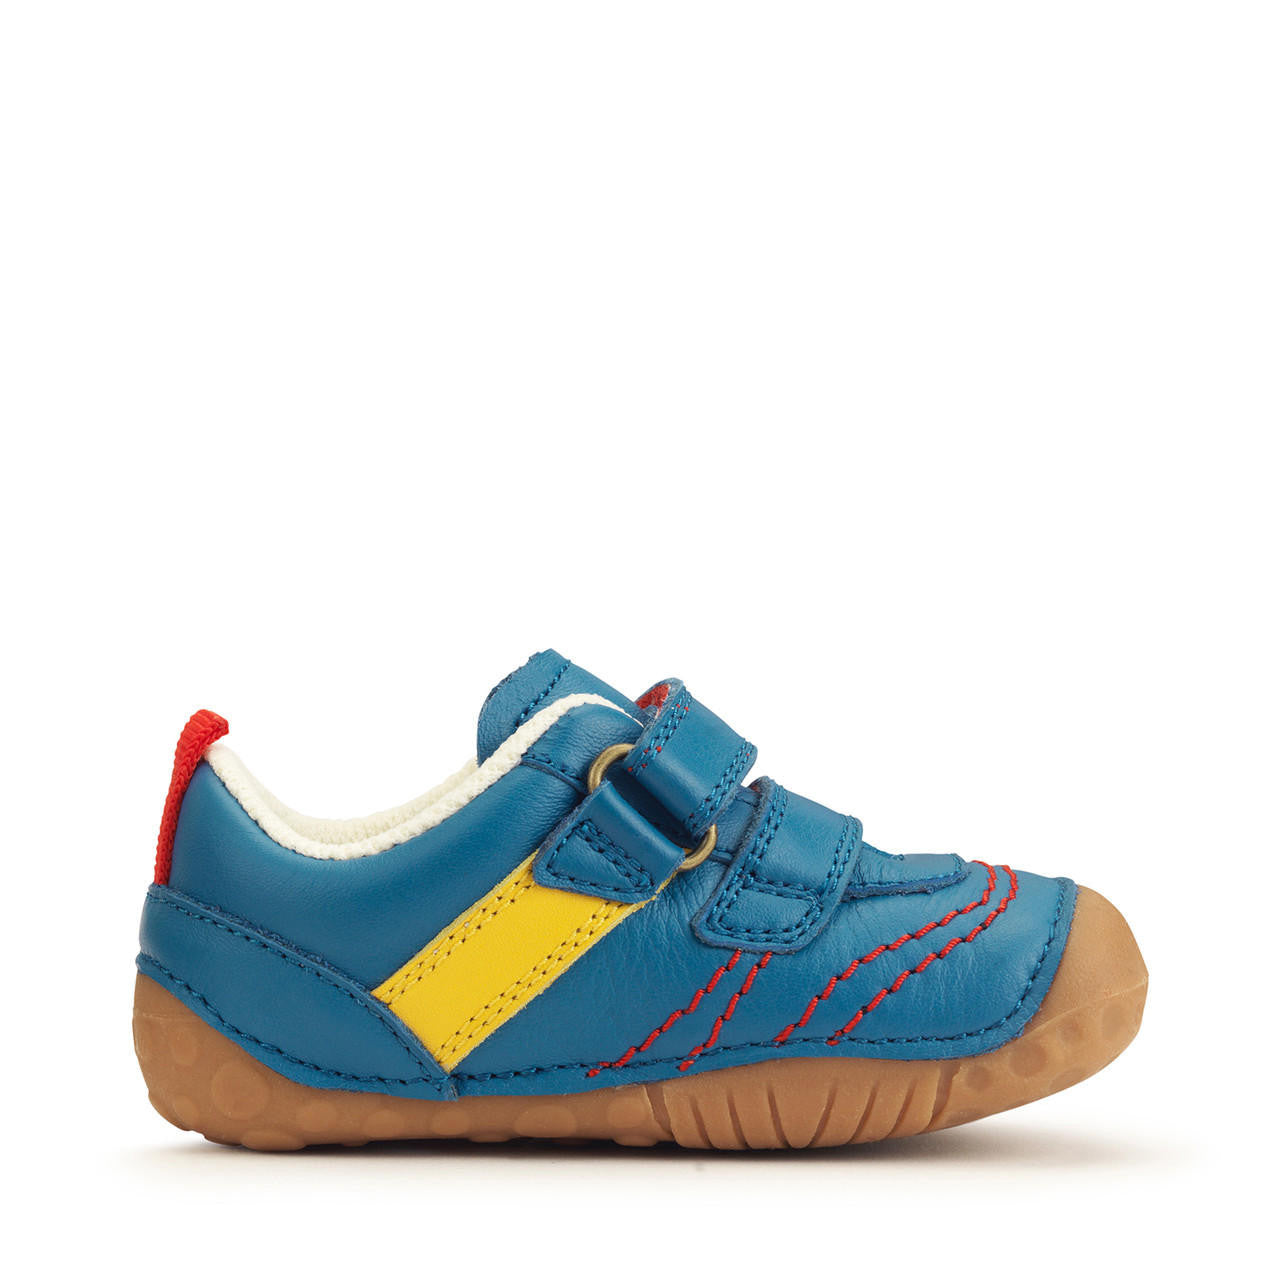 A boys pre-walker by Start-Rite, style Little Smile. In blue leather multi with double velcro fastening and toe bumper. Left side view.